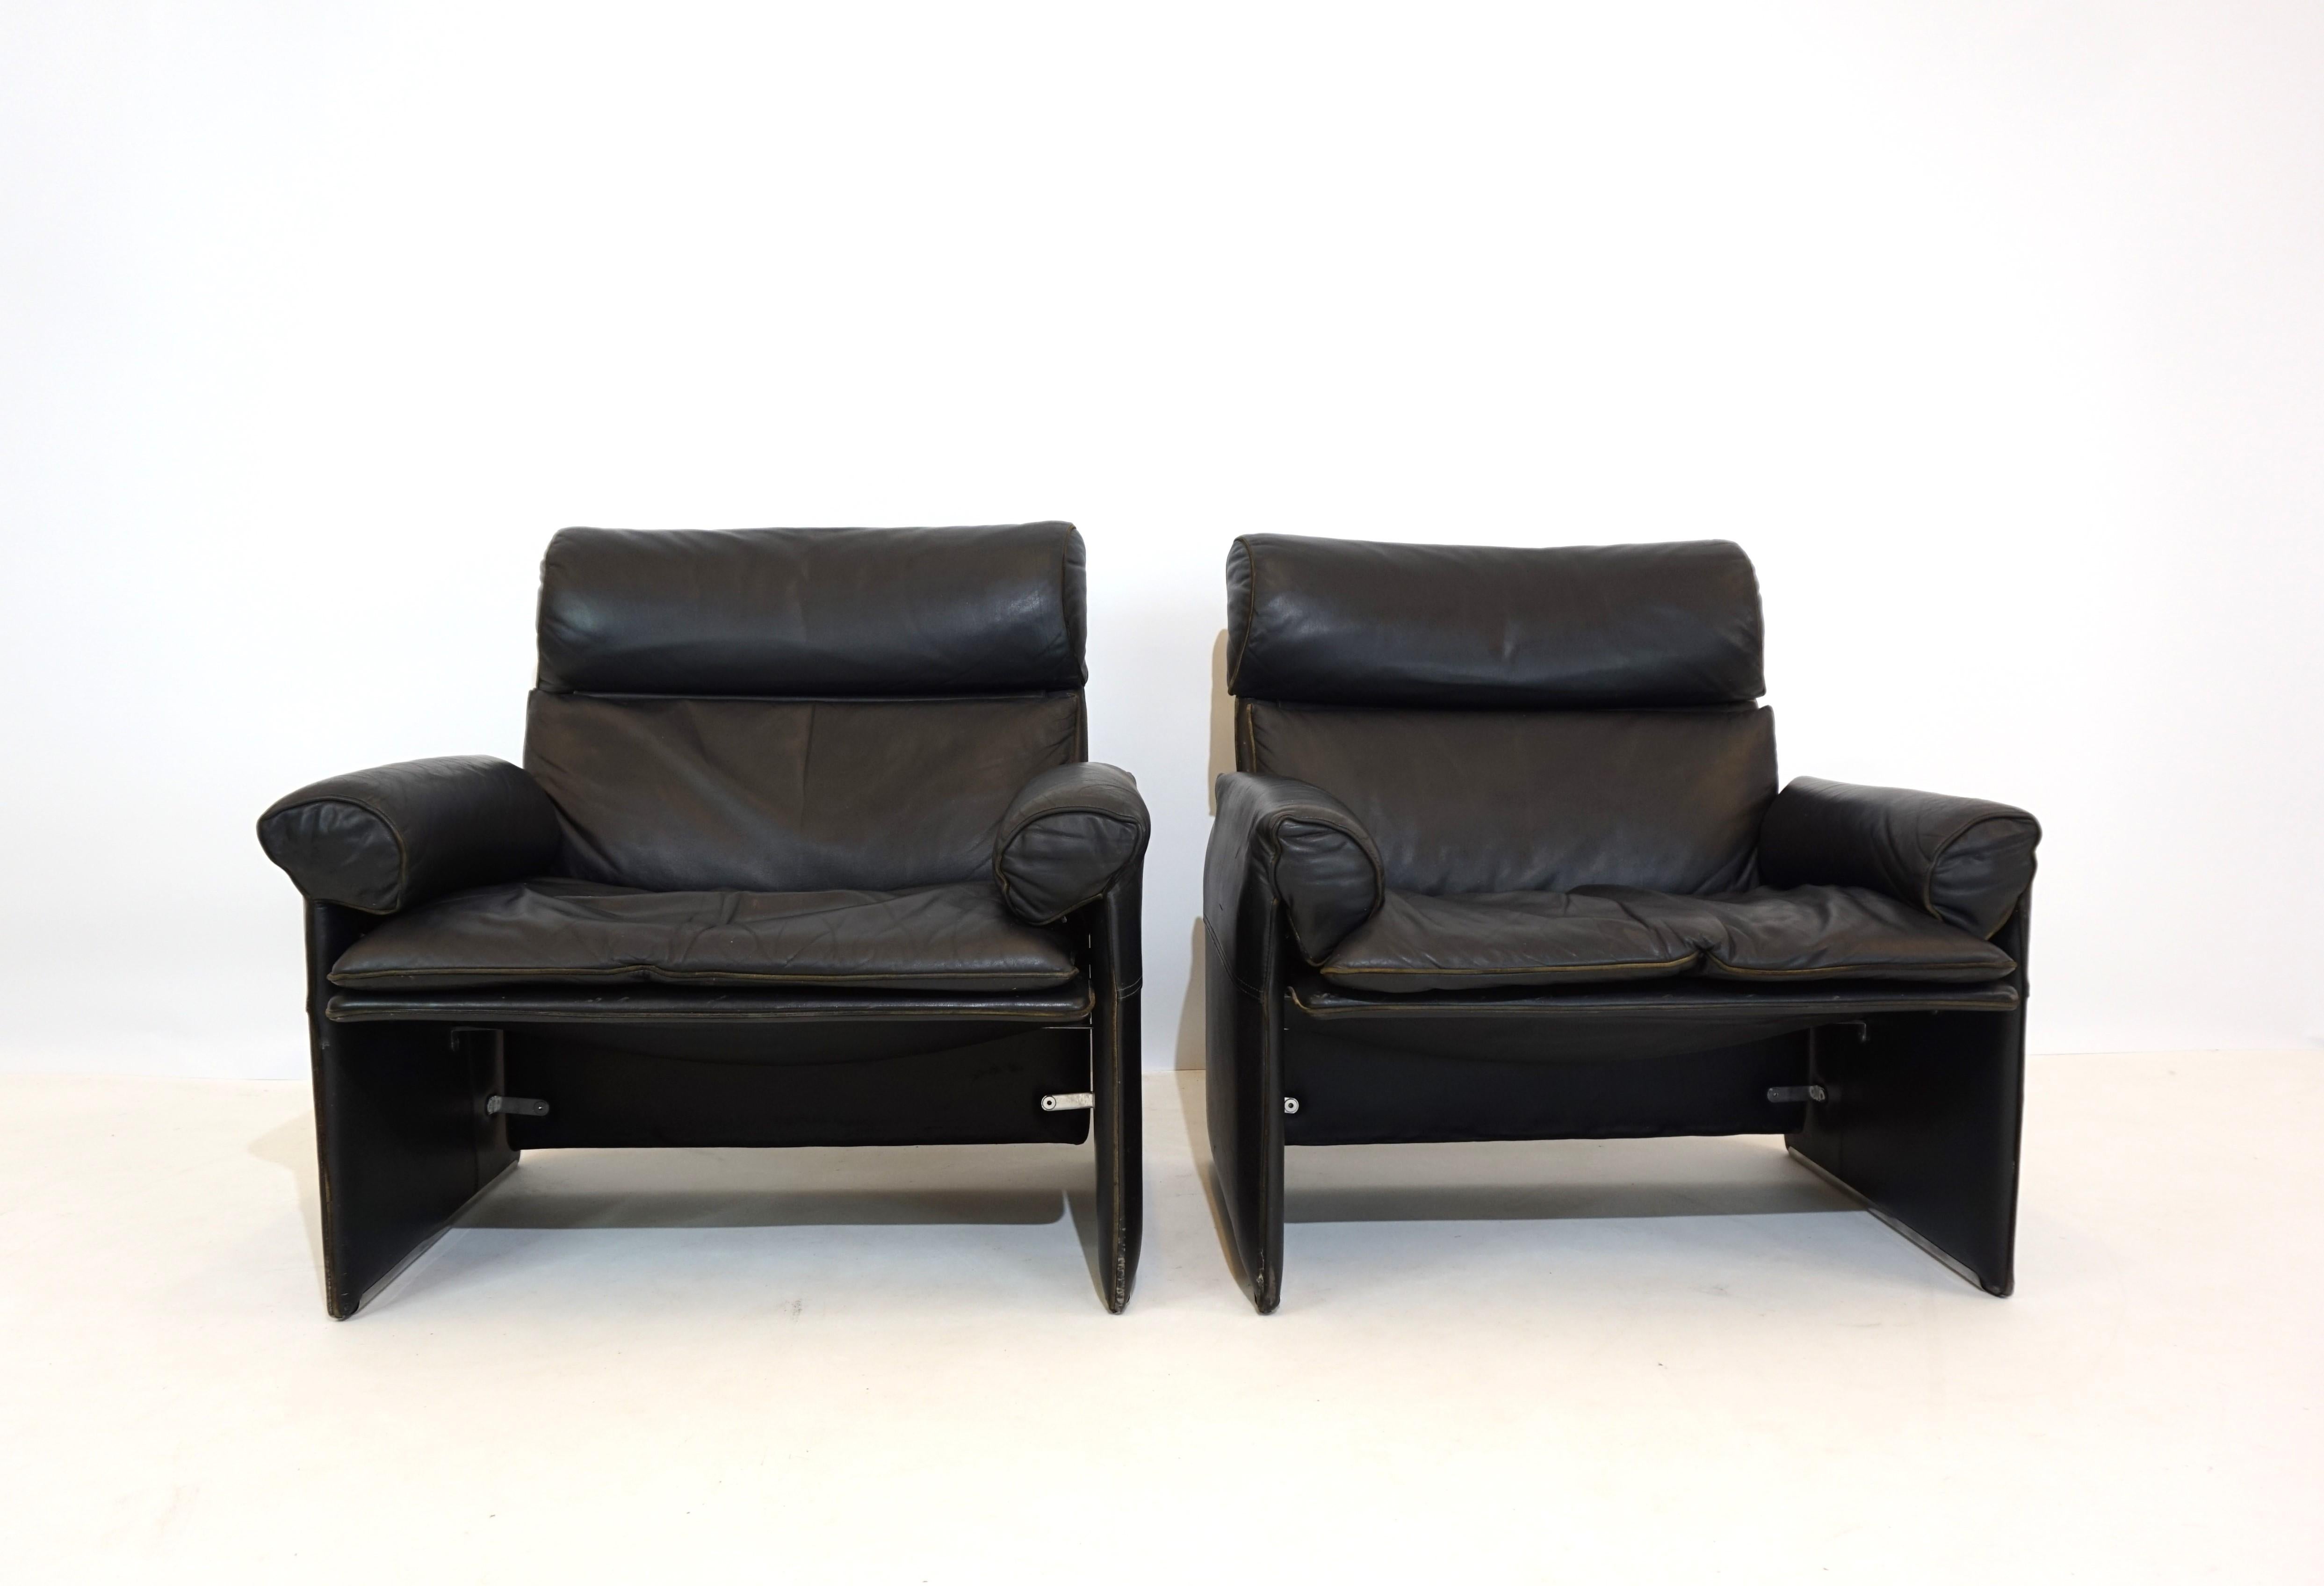 These two saporiti armchairs from the 70s are in good condition. The soft black leather only shows slight signs of wear and patina. The seat backs are slightly springy and the armchairs offer very good seating comfort.

 

The Italian designer